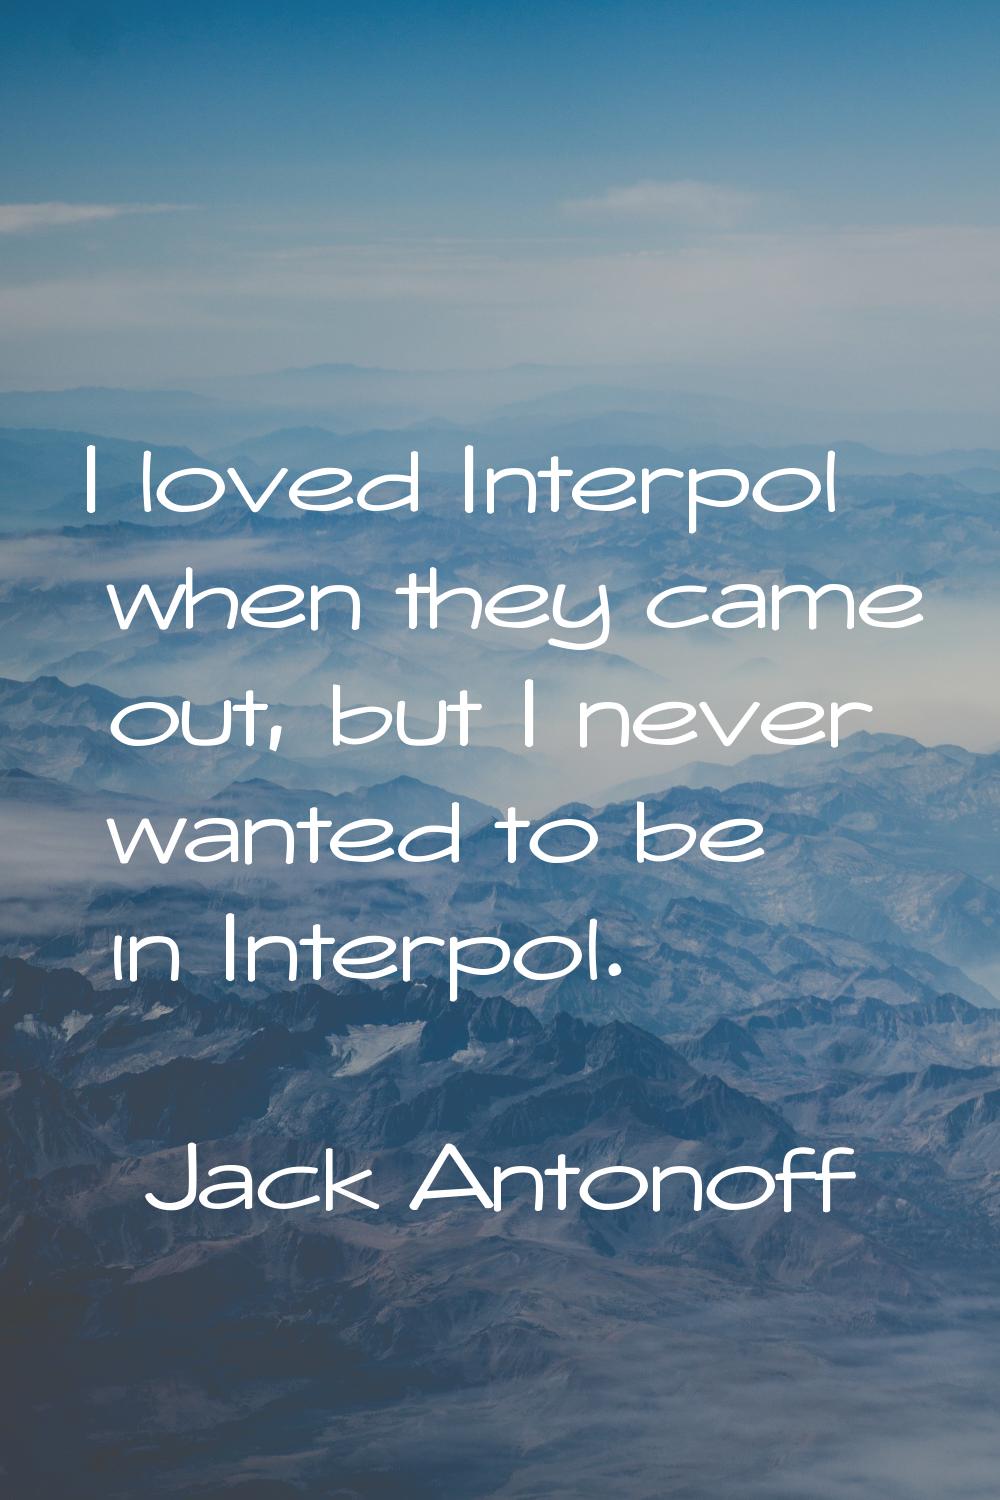 I loved Interpol when they came out, but I never wanted to be in Interpol.